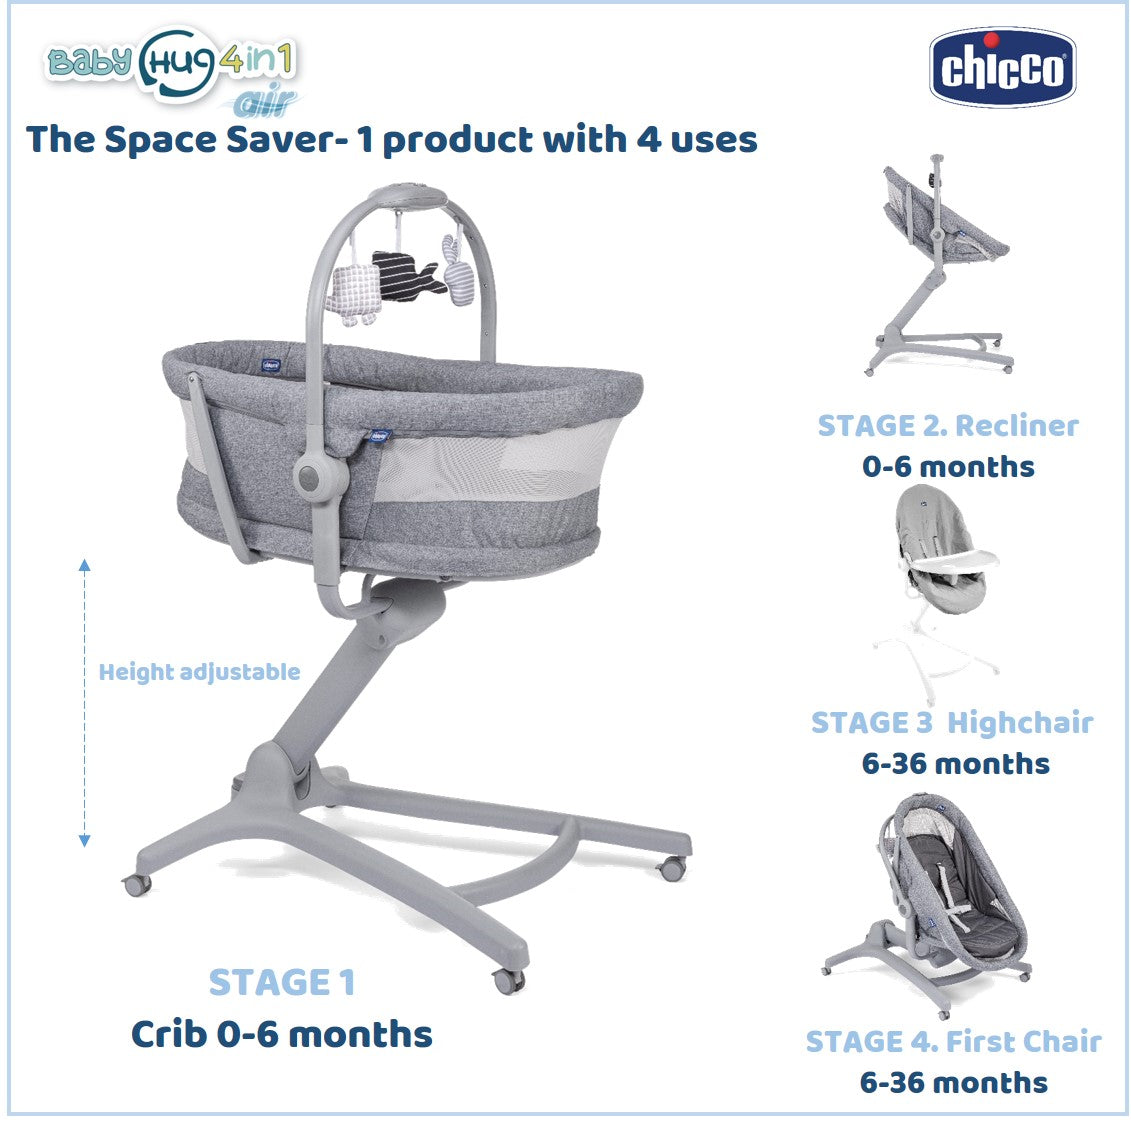 Chicco - Say hello to the Chicco Baby Hug Air 4-in-1, the product designed  to grow with your child from birth to 3 years. Transforming from a cradle  to a raised recliner